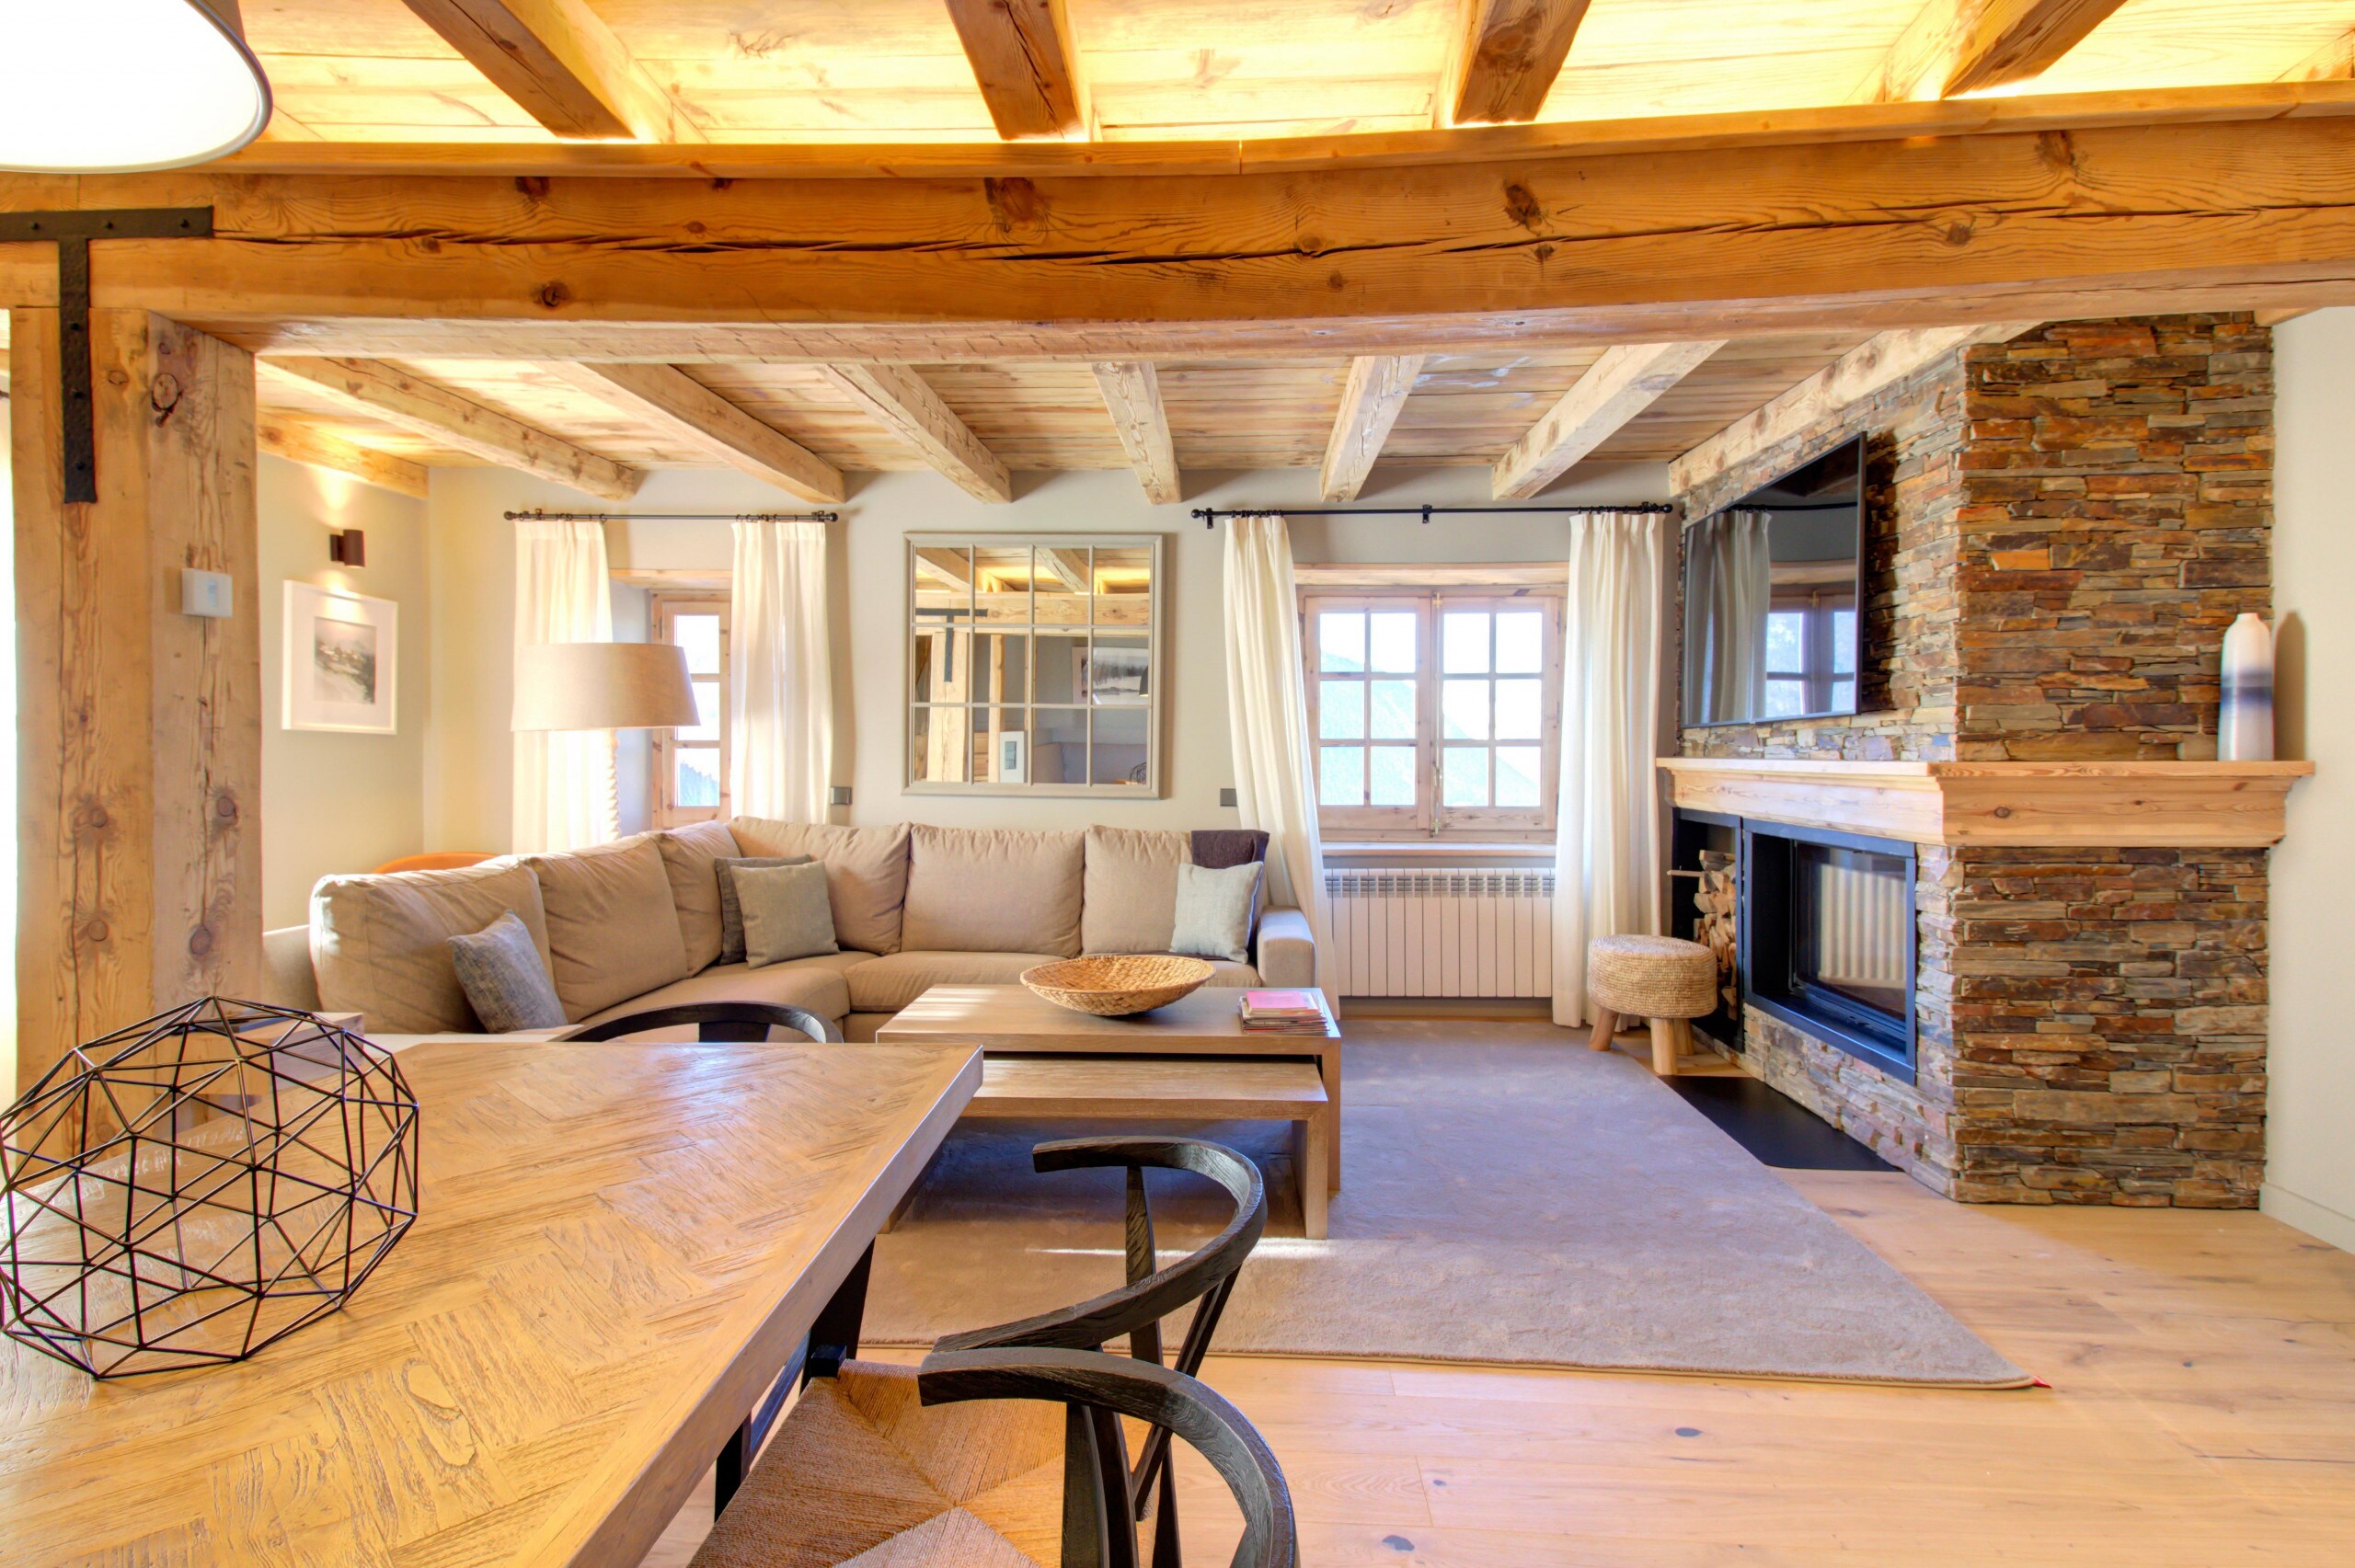 Property Image 1 - Casa Torreon fabulous home 3 bedrooms 7 people, in Pleta de Baqueira at Baqueira ,next to the ski chairlif